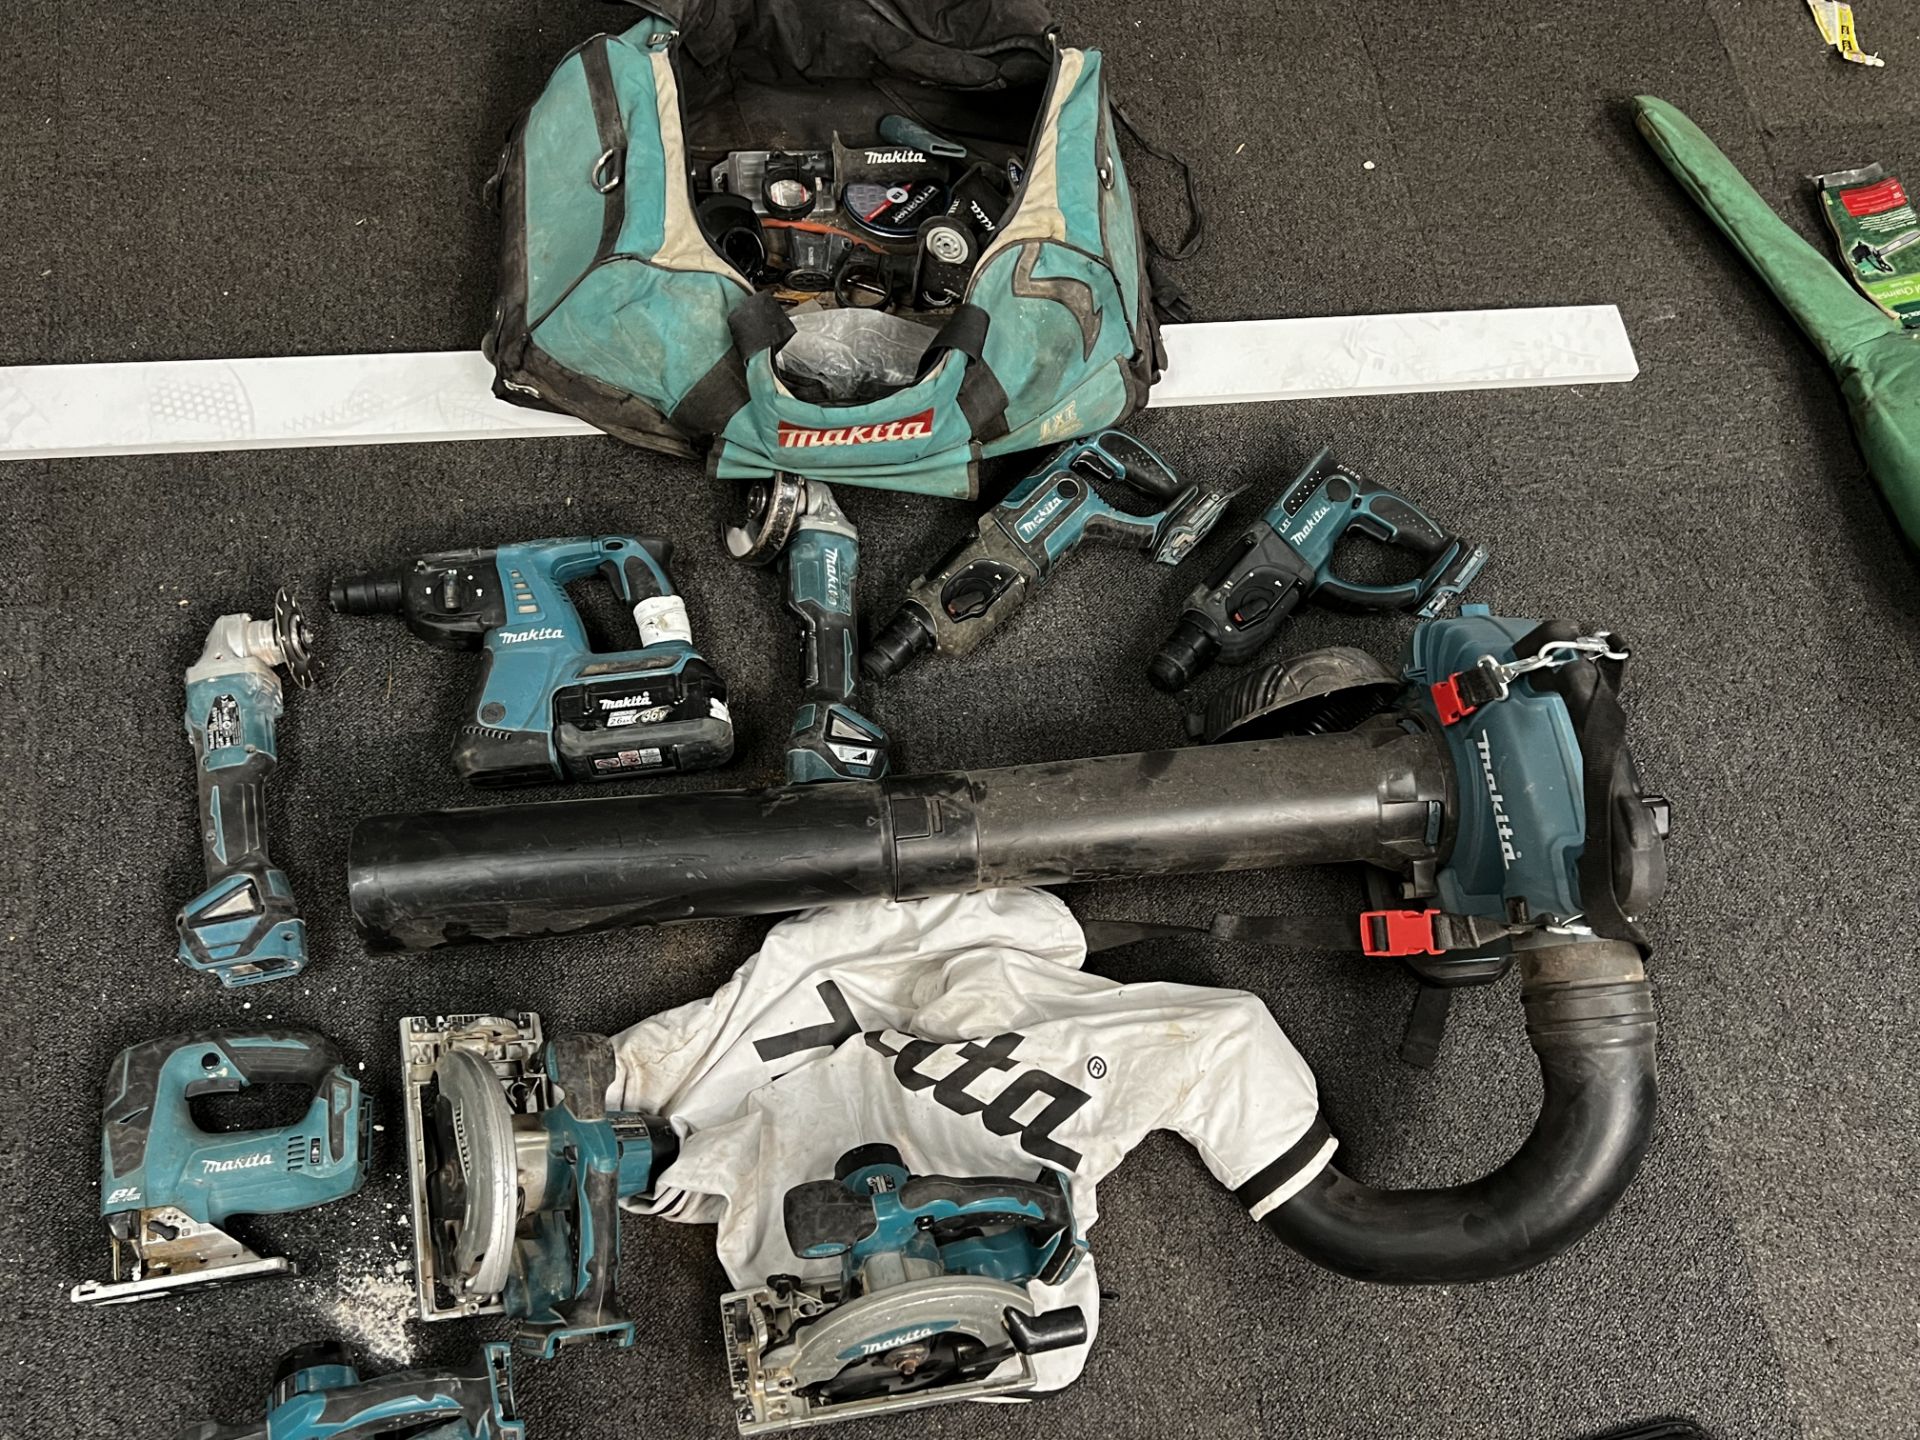 Makita rechargeable power tools as shown in photos